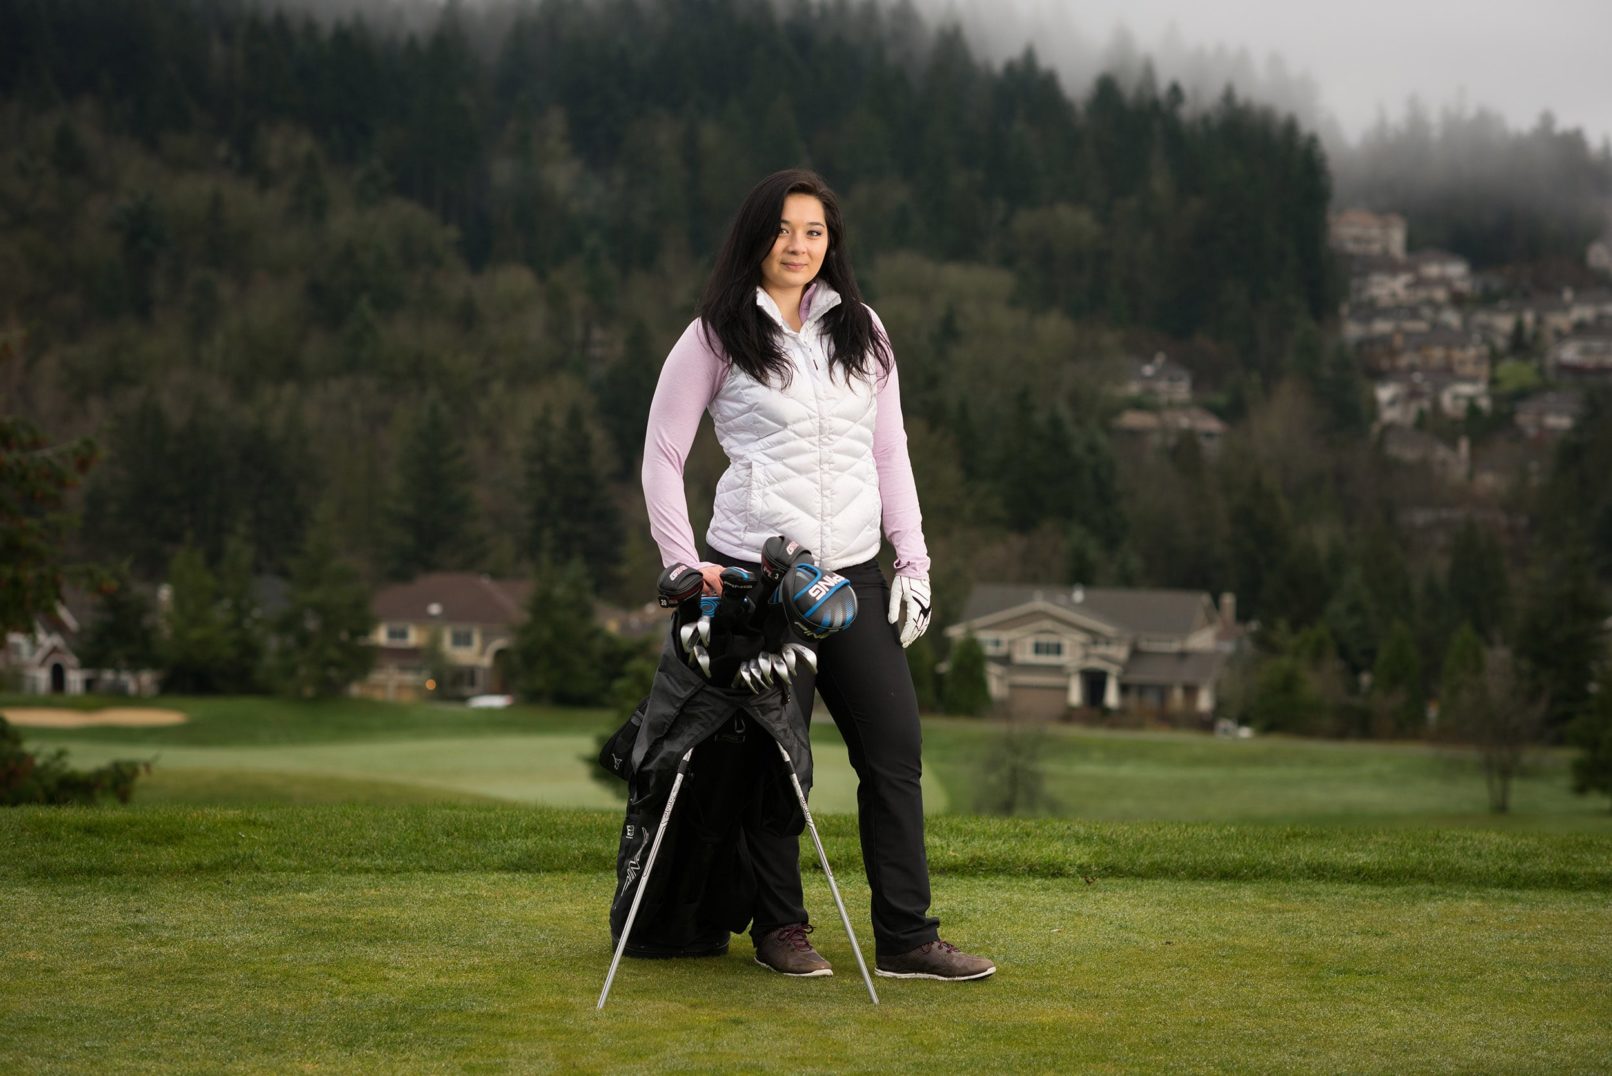 women outfitted for golf with golf clubs held up by tripod attached to golf bag and houses and hills beyond the course.